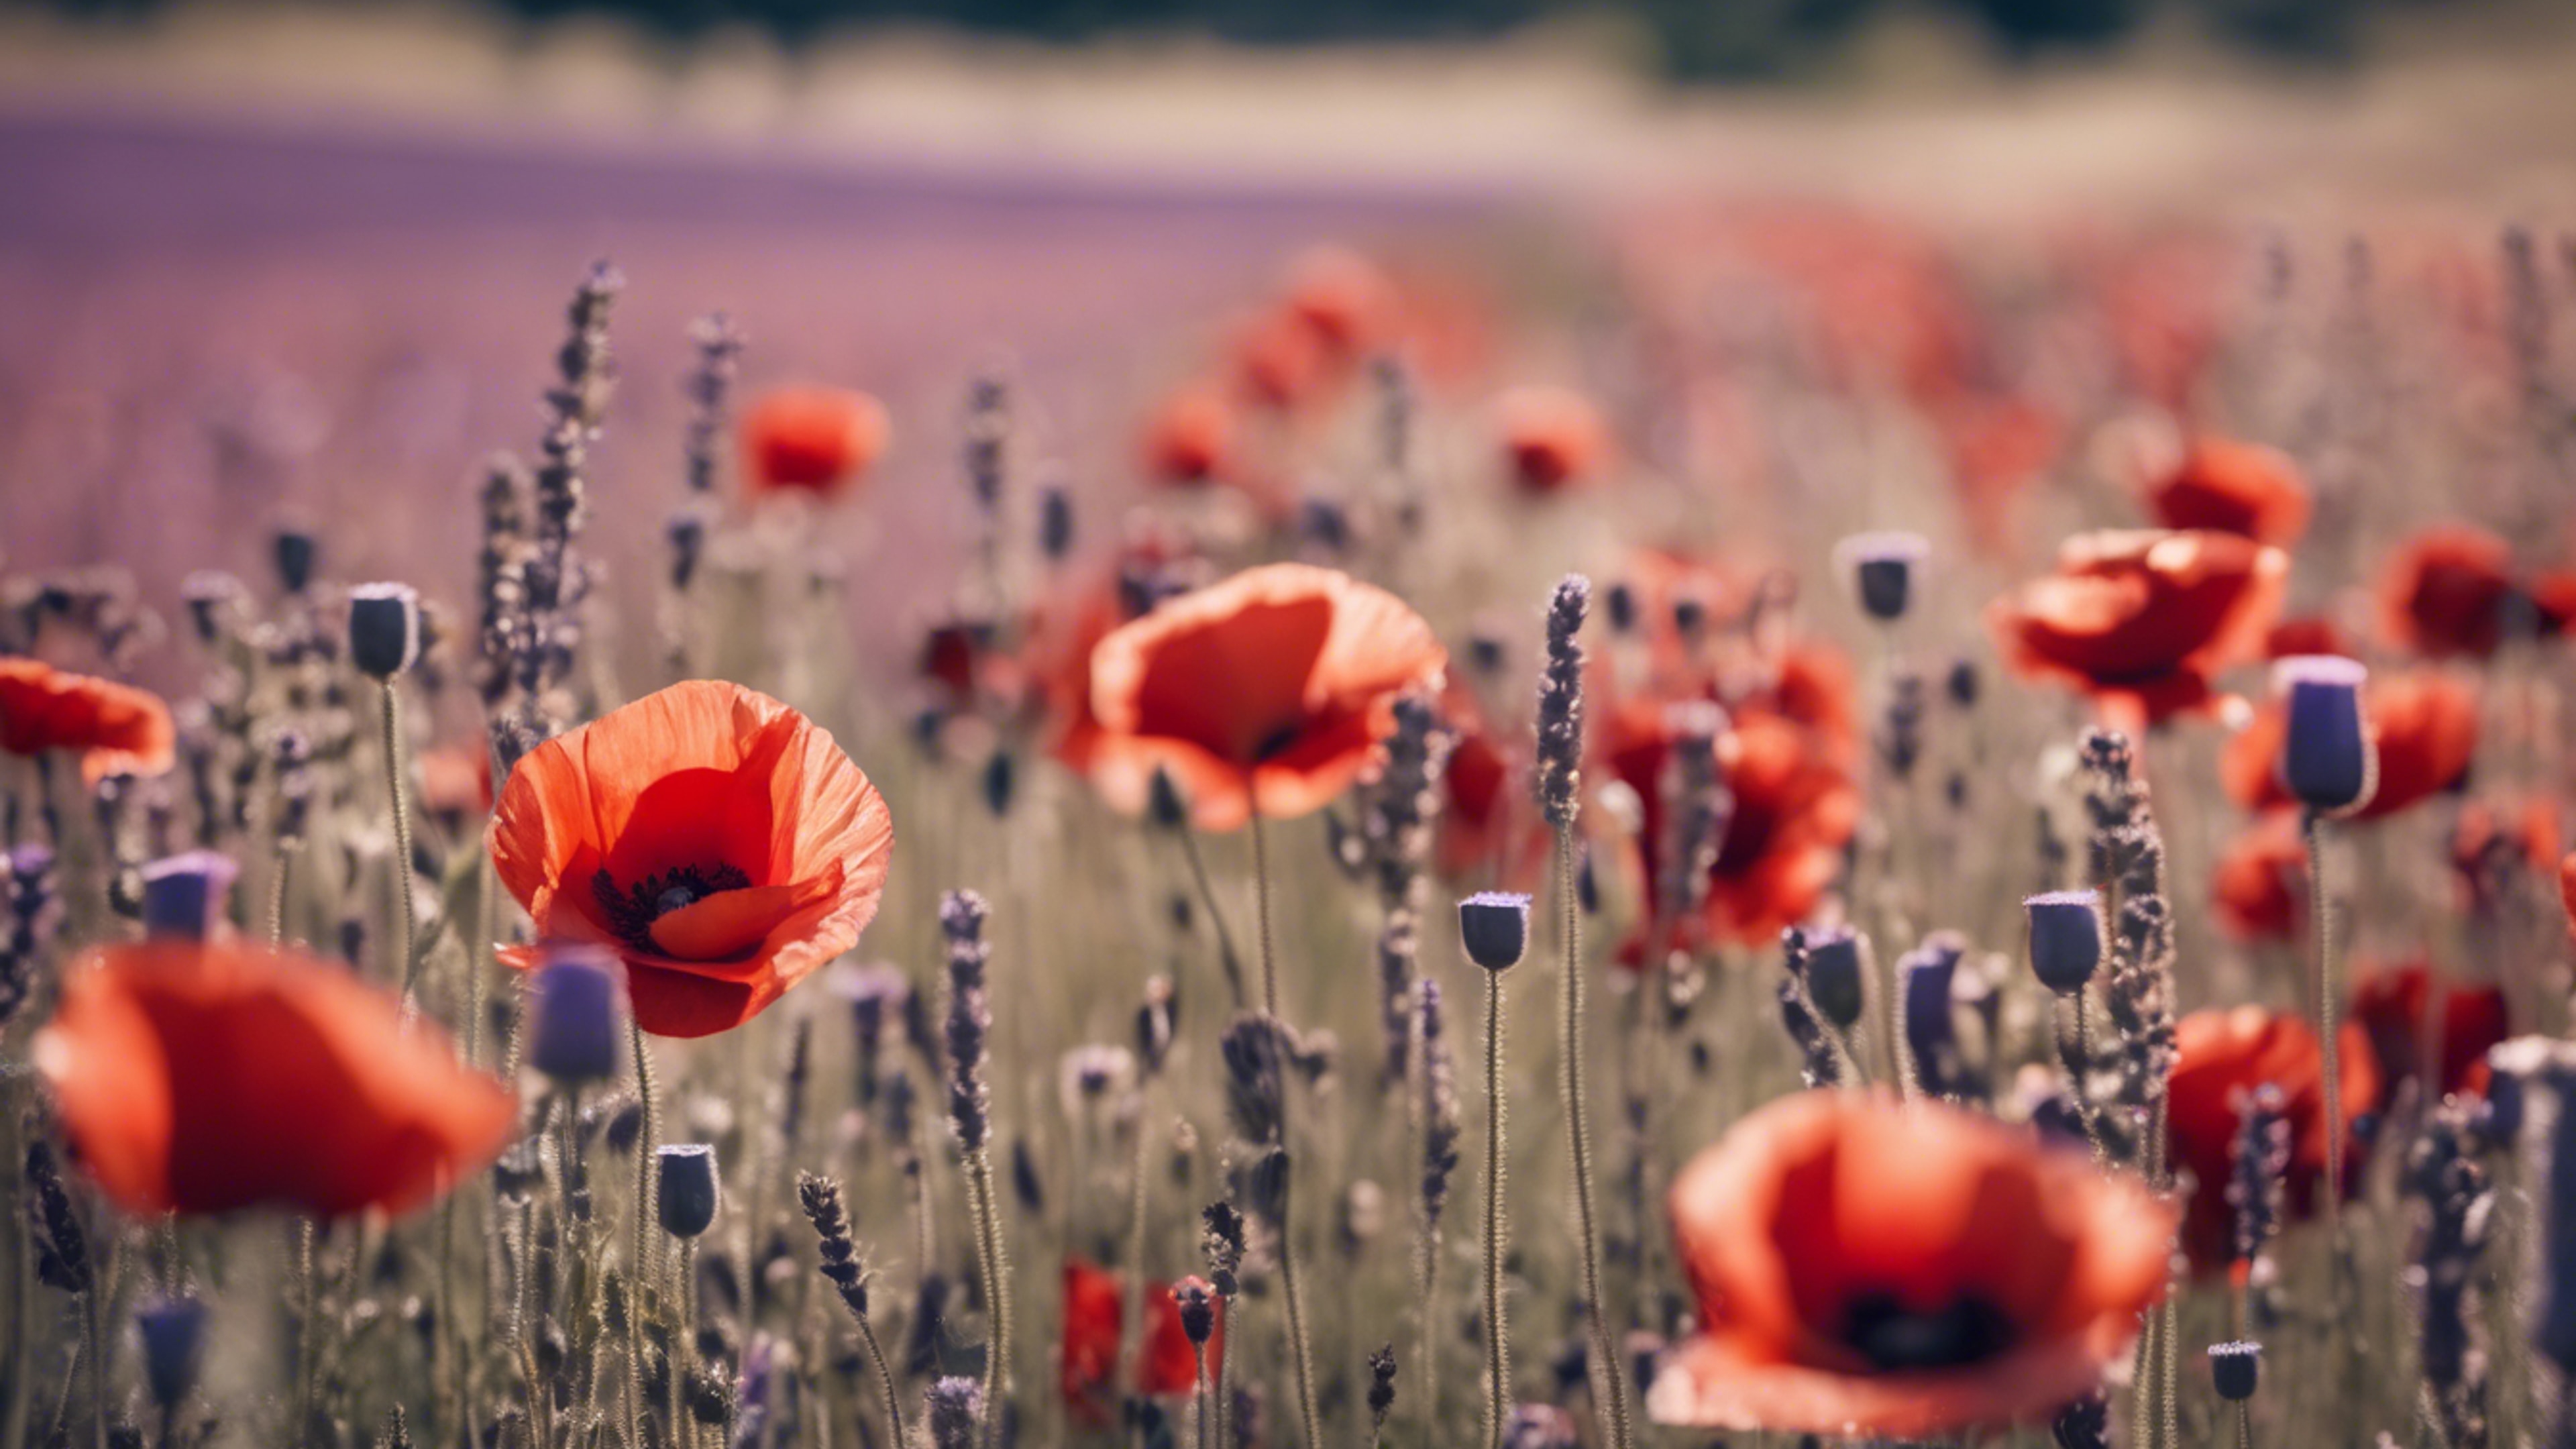 A field of red poppies naturally fading into a lavender field. Kertas dinding[76e938c2507742cfb107]